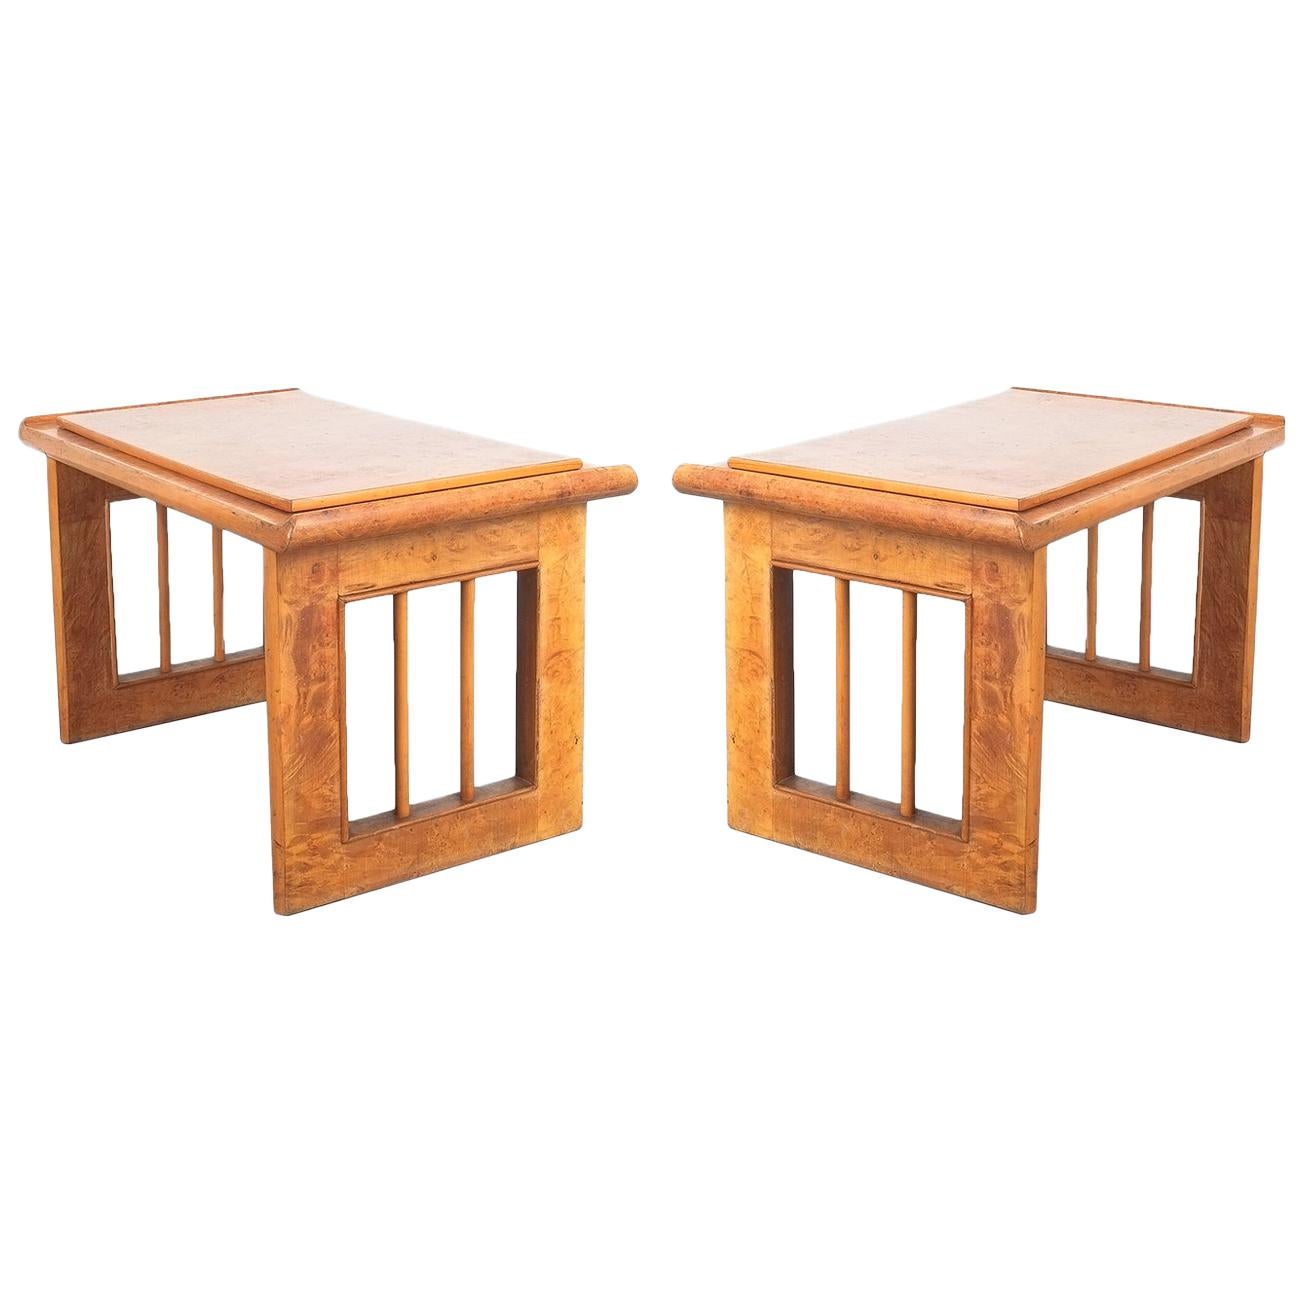 Art Deco Nightstands or Sofa Side Tables from Burl Wood, Italy, circa 1940